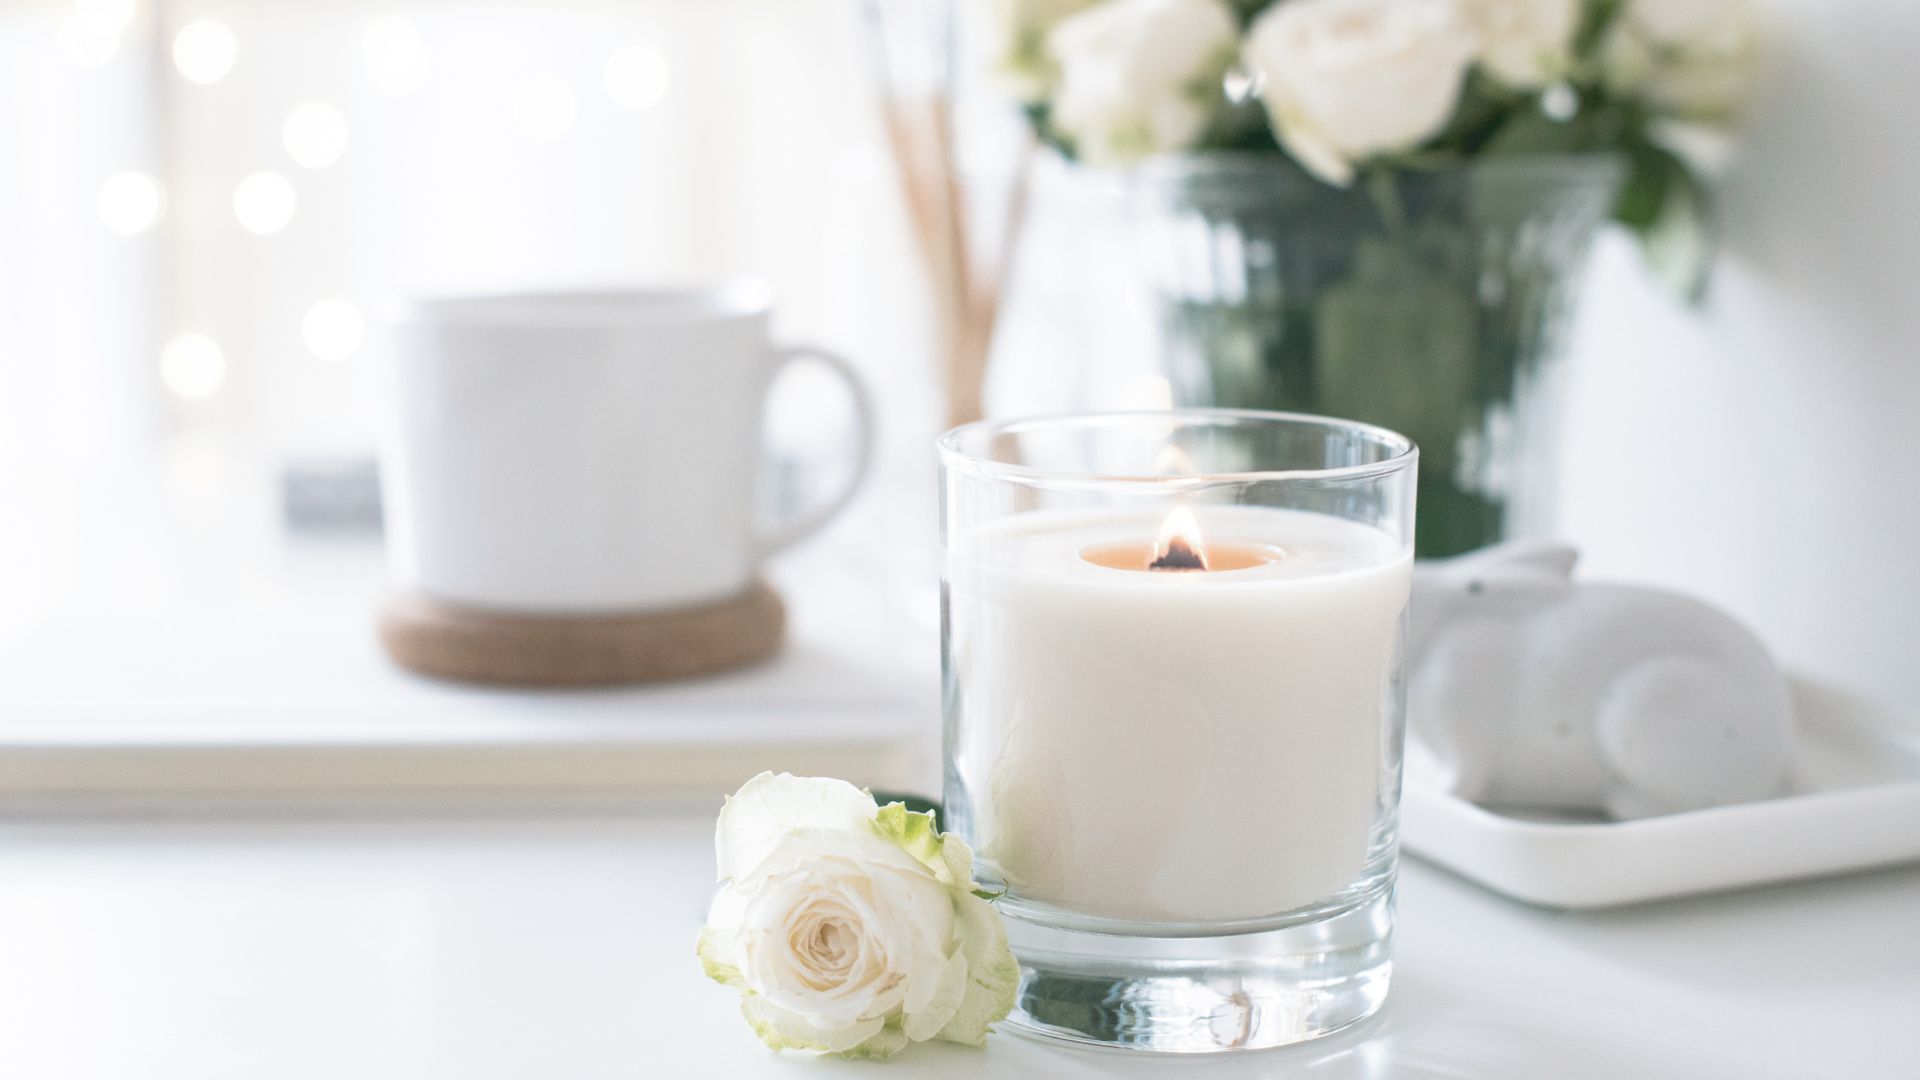 Create a welcoming atmosphere with aromatic candles and fragrance diffusers